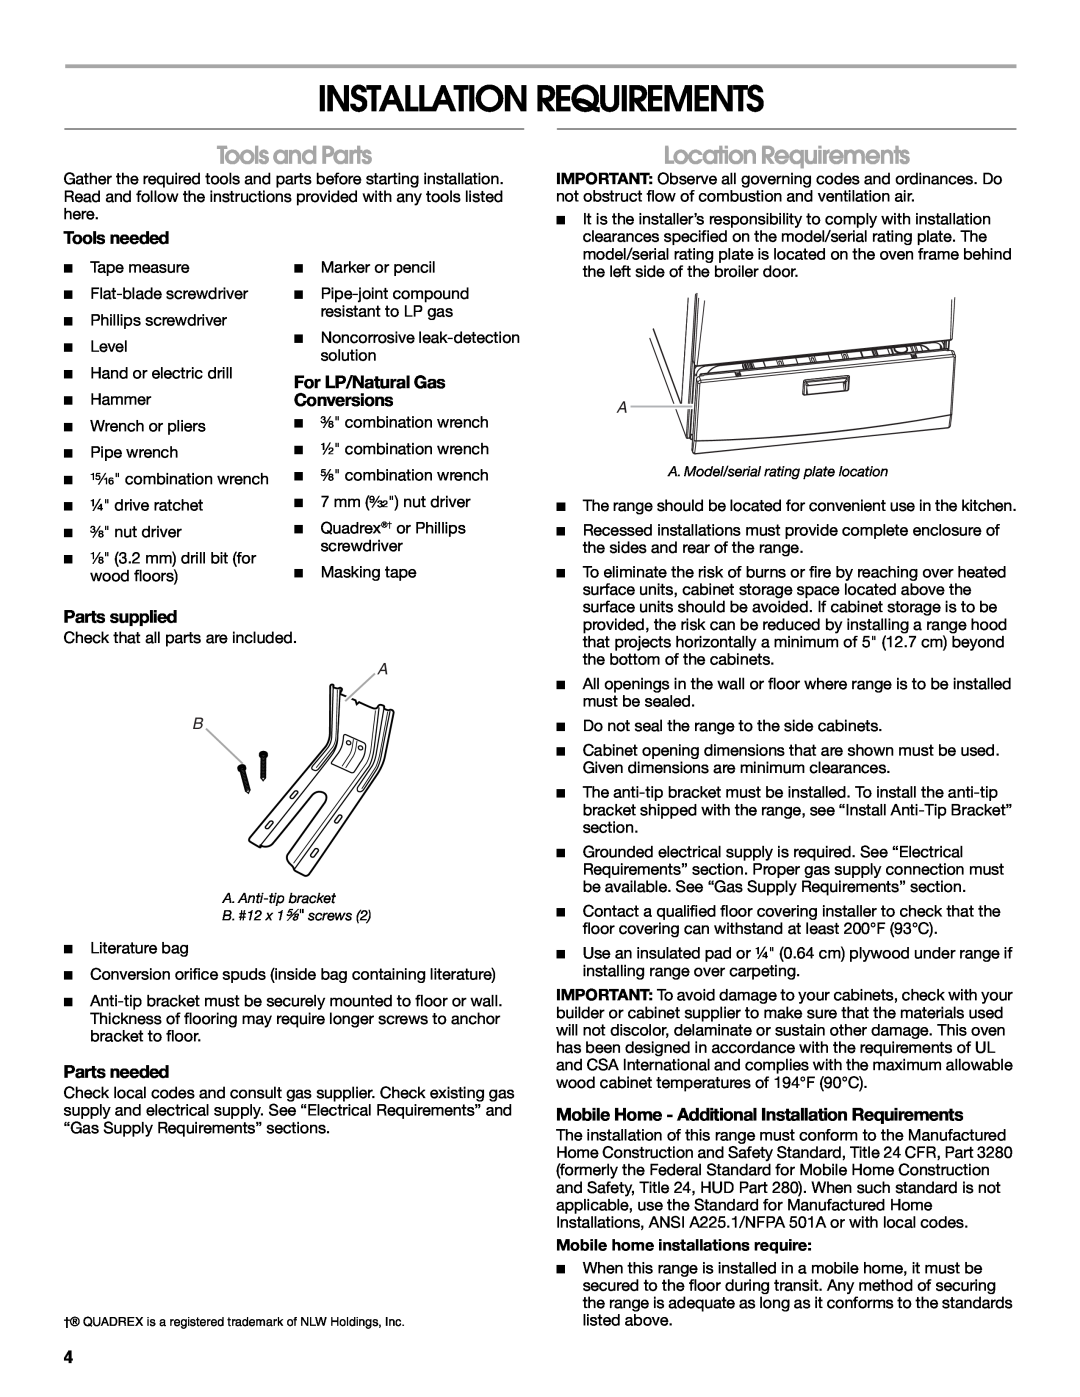 Whirlpool W10459123B Installation Requirements, Tools and Parts, Location Requirements, Tools needed, Parts supplied 